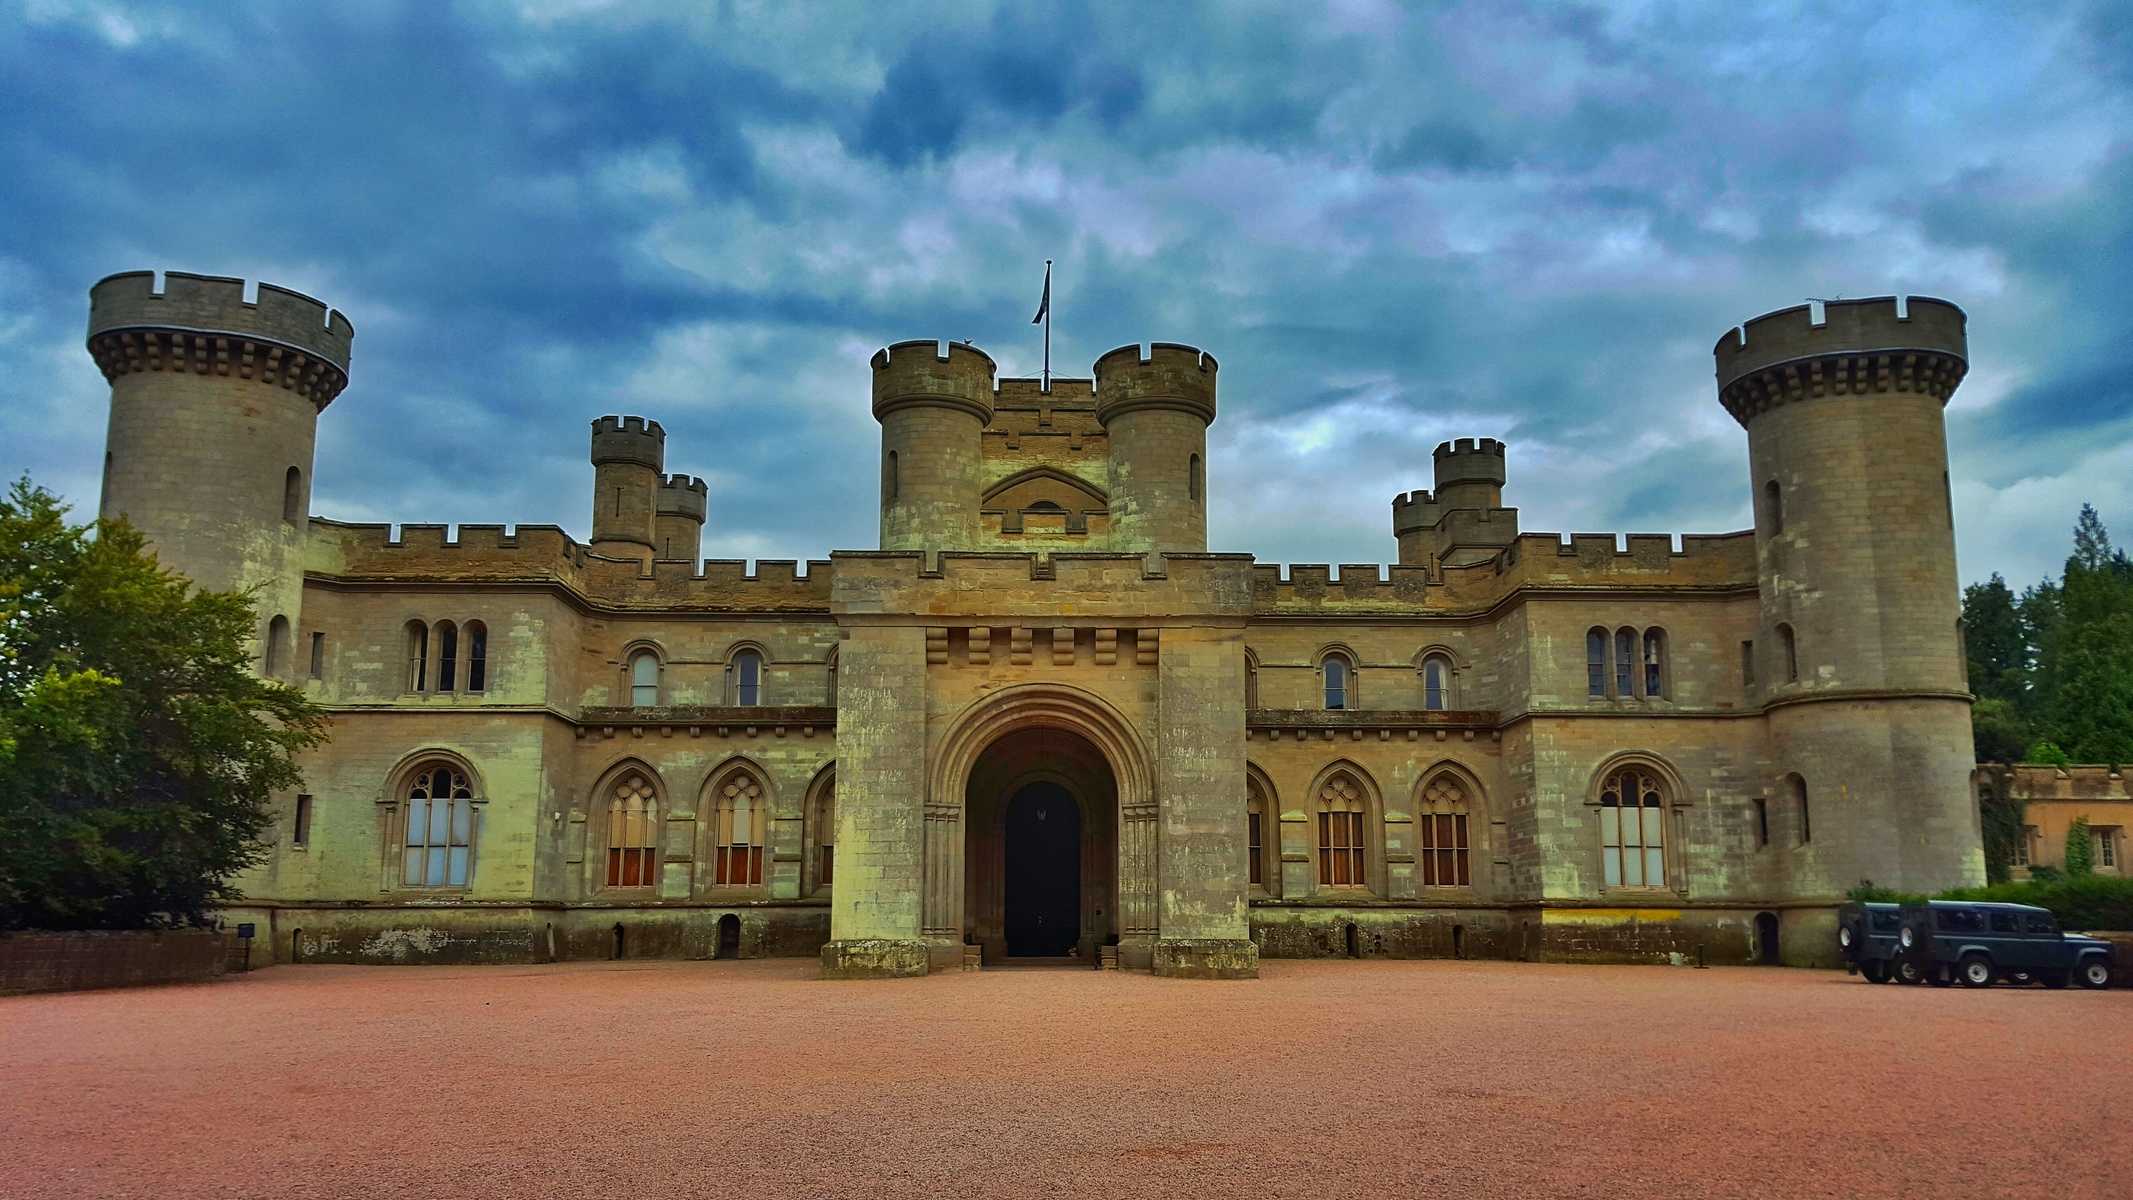 A review of a day out at Eastnor Castle